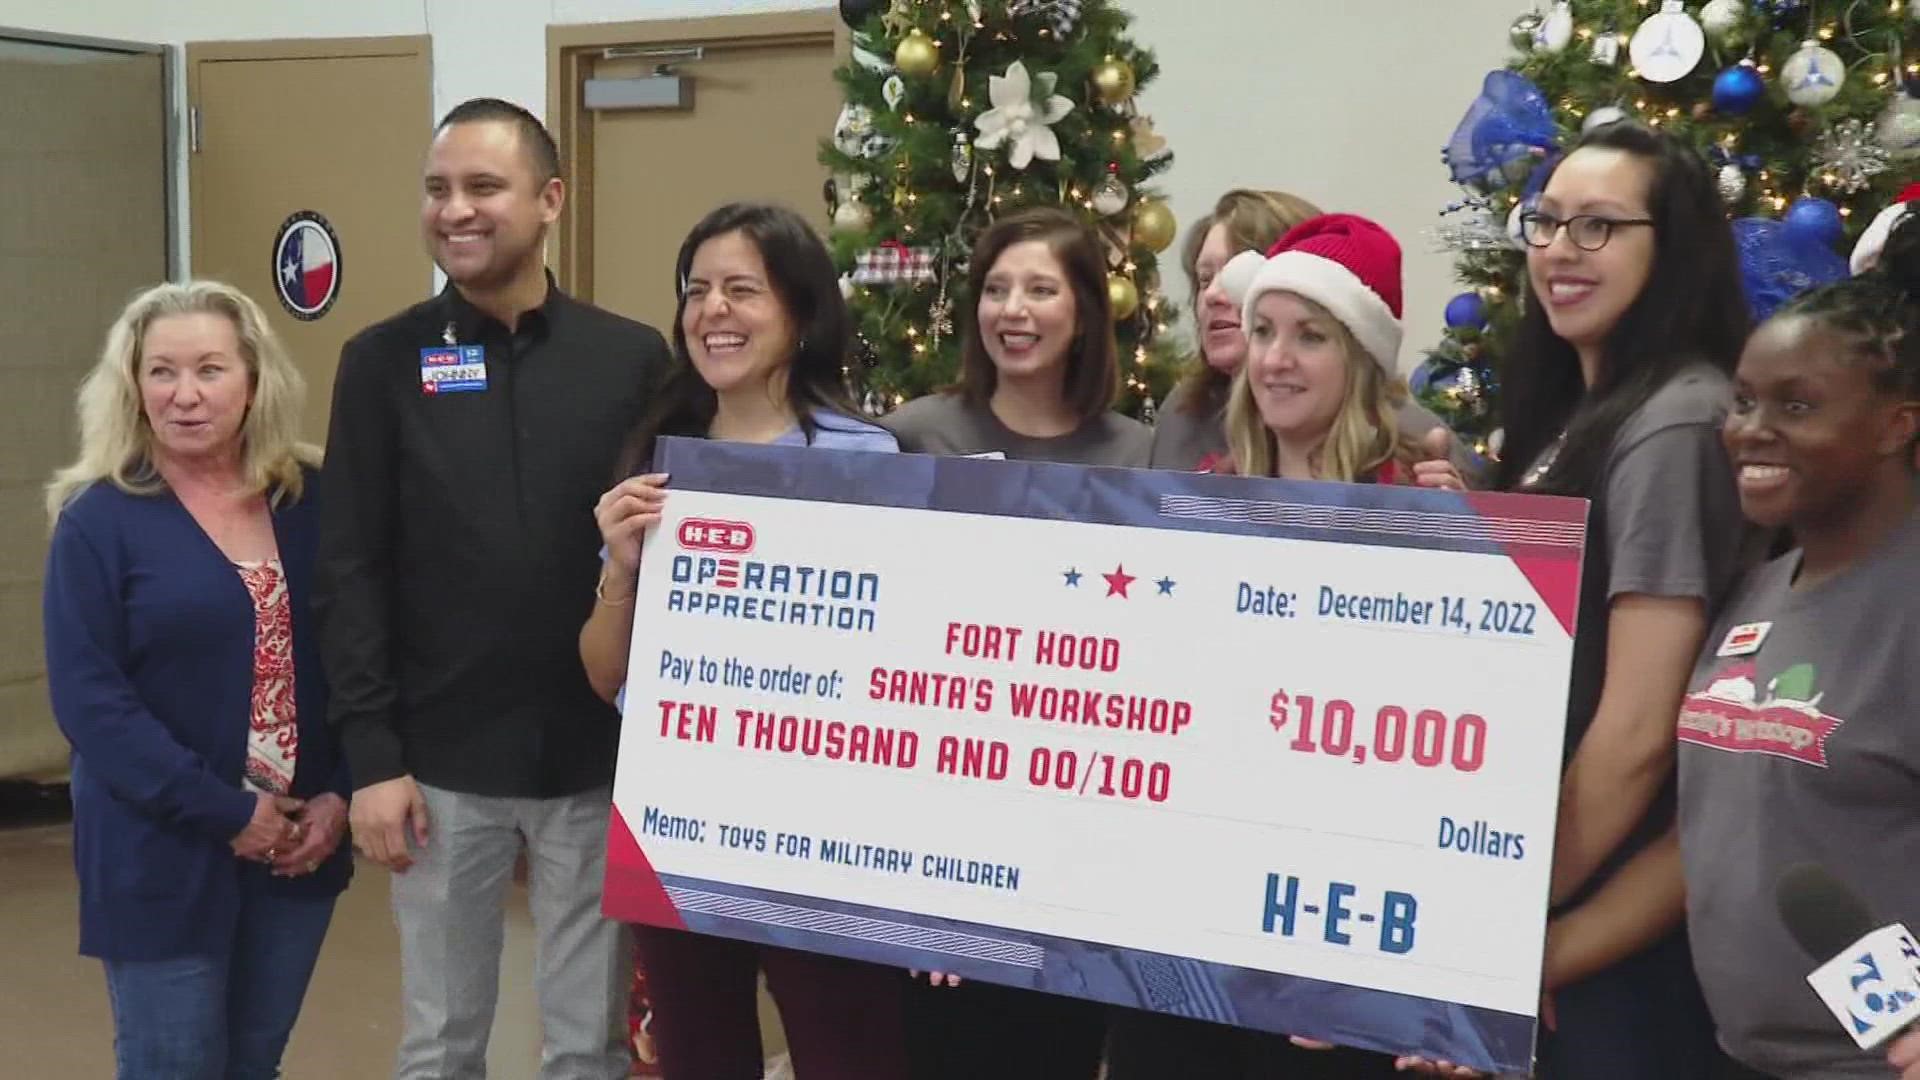 The charity drive helps military families on Fort Hood during the holidays.